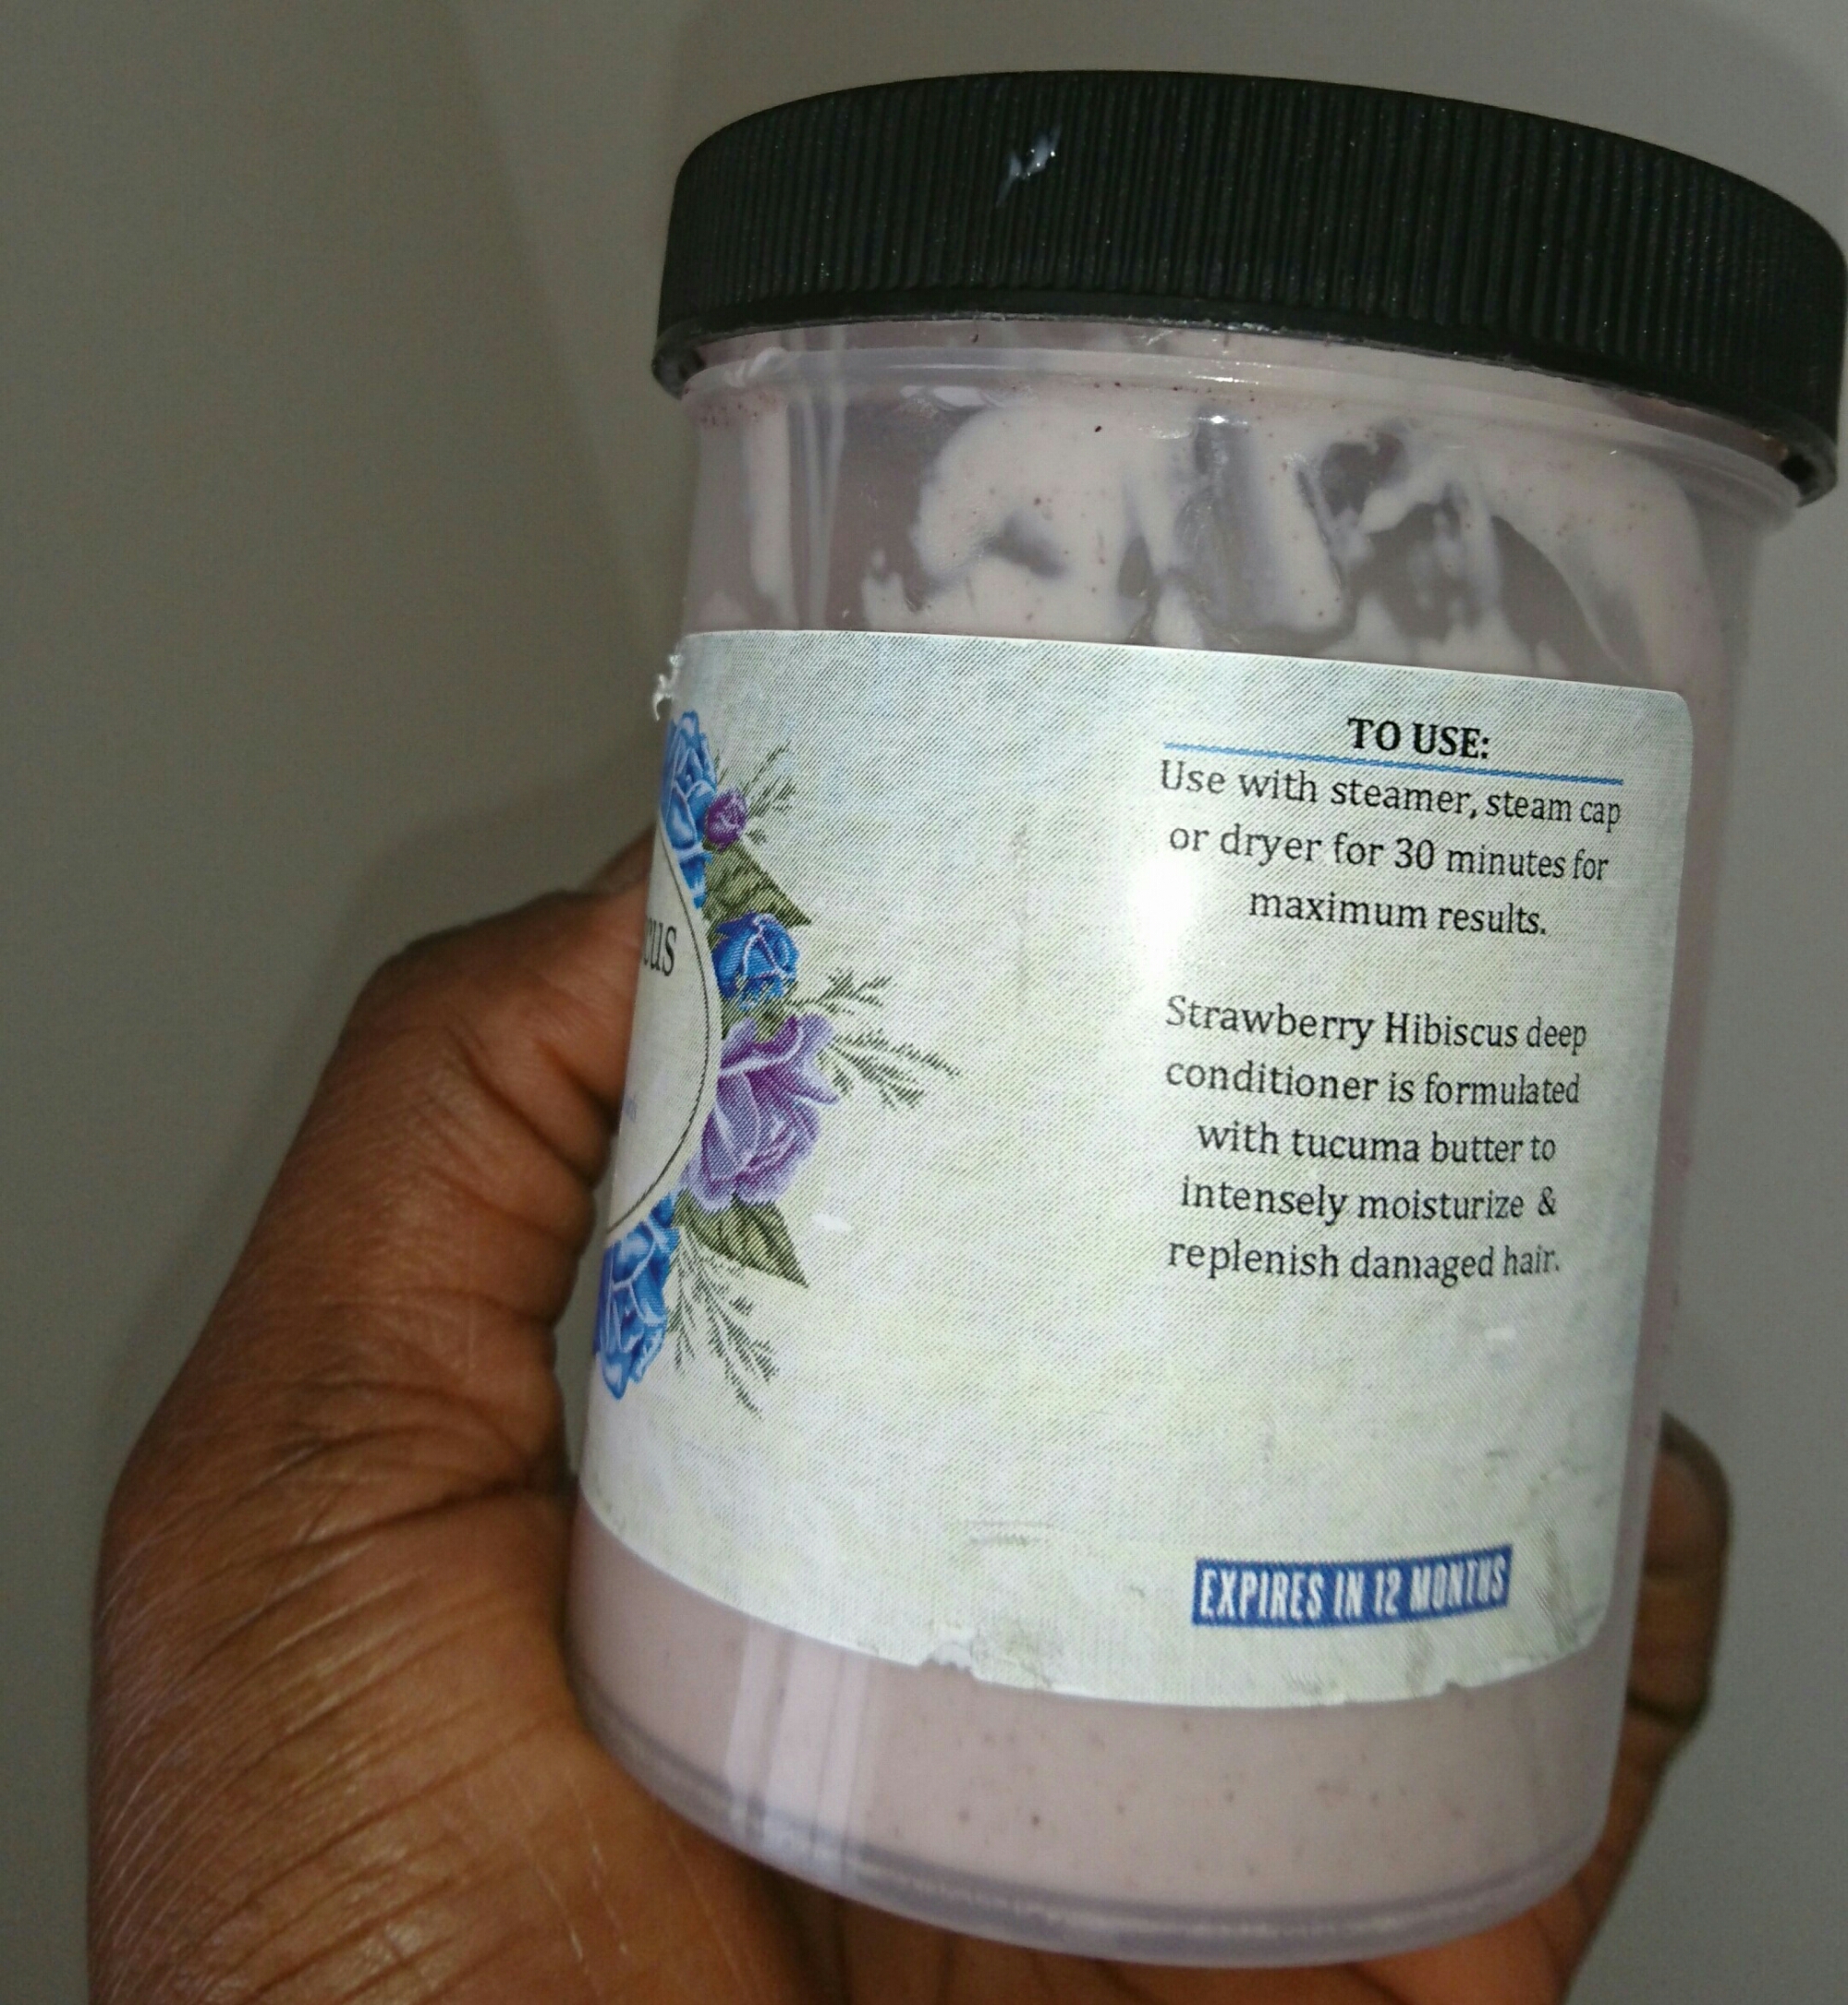 BLUE ROZE BEAUTY STRAWBERRY HIBISCUS DEEP CONDITIONER ingredients